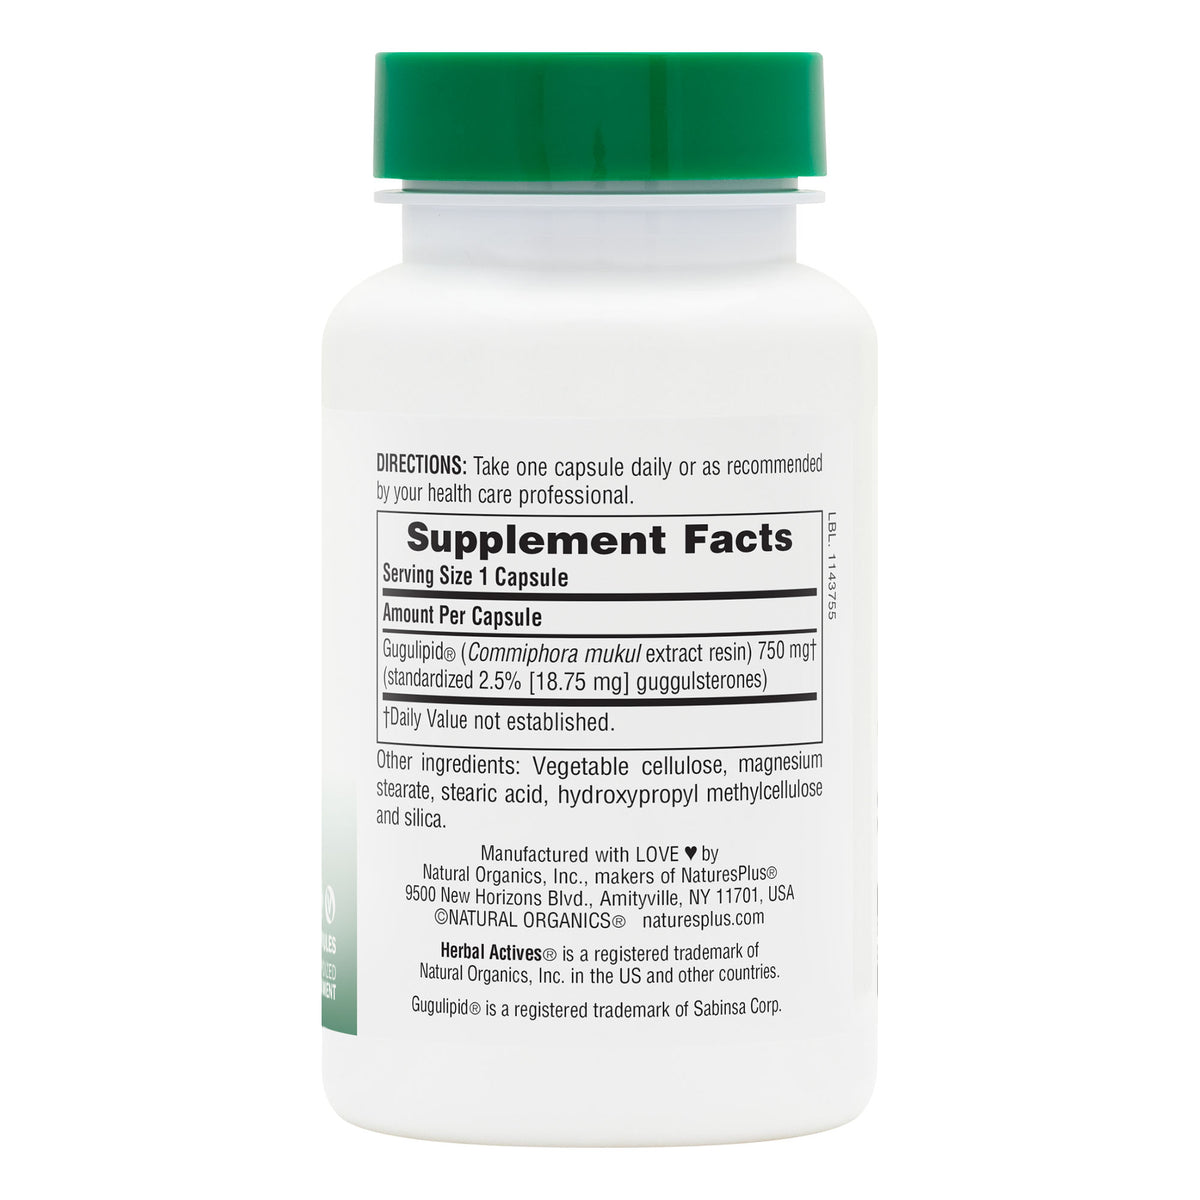 product image of Herbal Actives Gugulipid® Capsules containing 60 Count